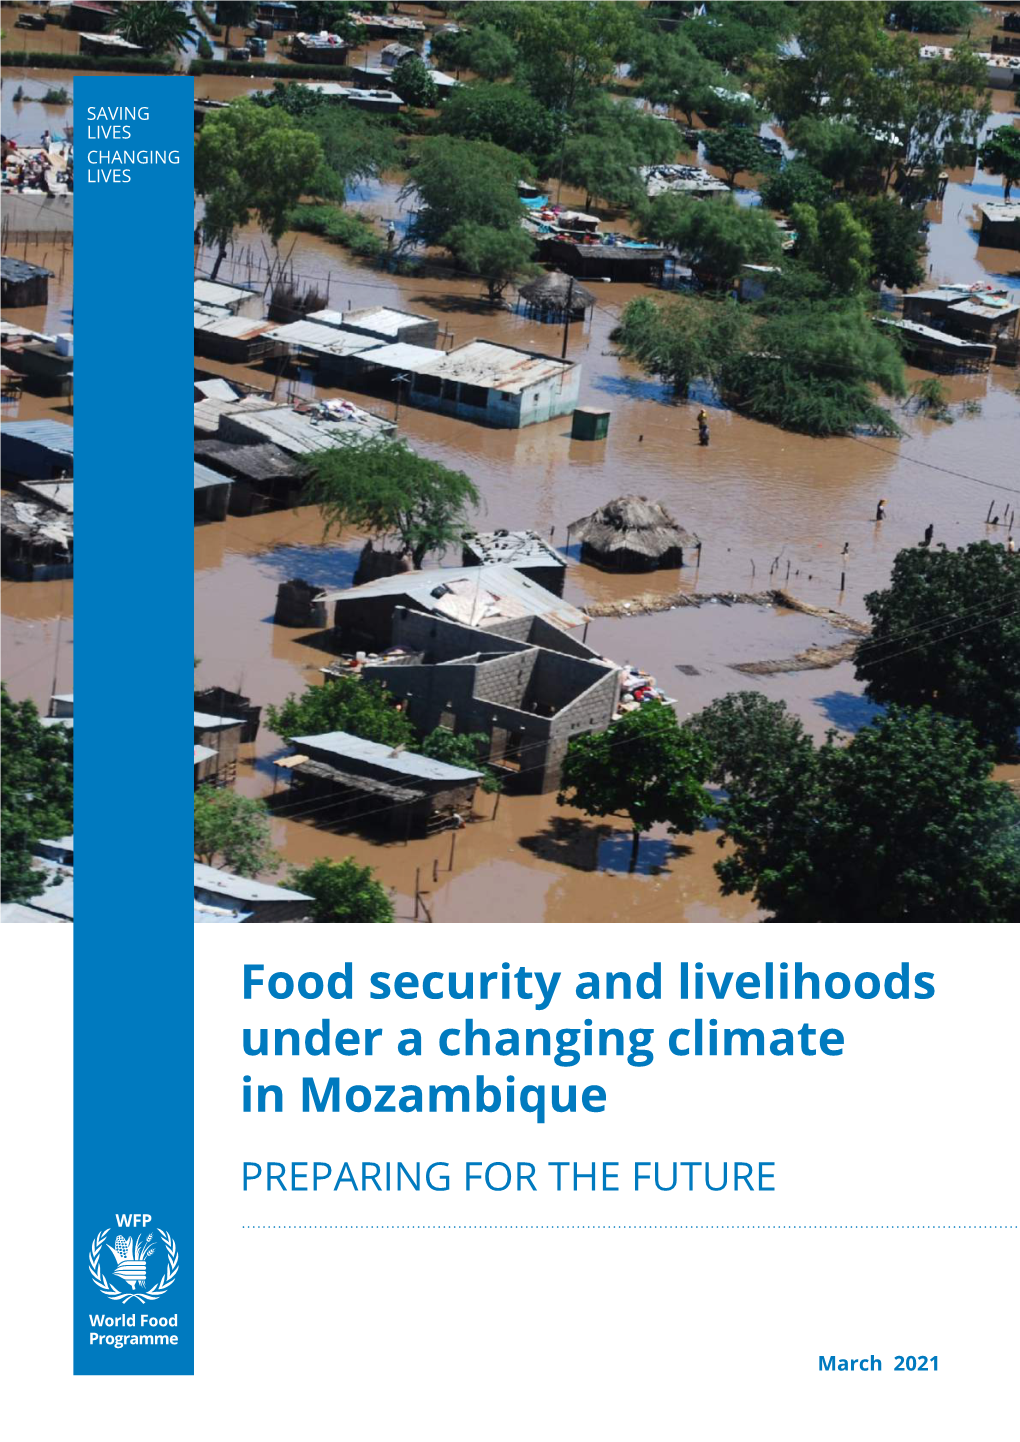 Food Security and Livelihoods Under a Changing Climate in Mozambique PREPARING for the FUTURE